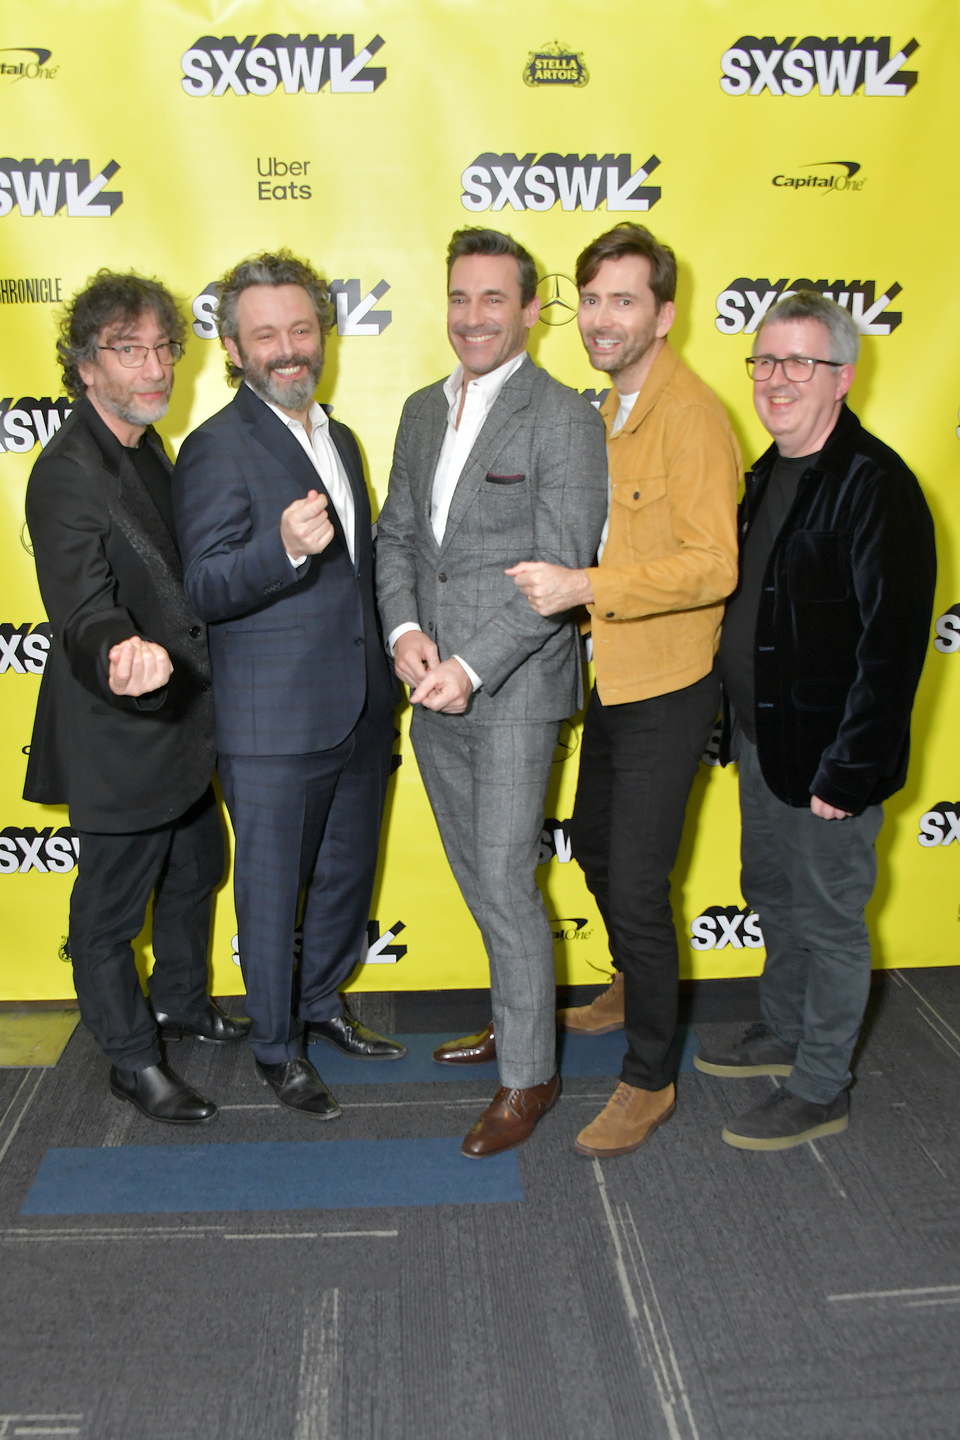 (L-R) Neil Gaiman, Michael Sheen, Jon Hamm, David Tennant, and Douglas Mackinnon at Good Omens: The Nice and Accurate SXSW Event – Photo by Michael Loccisano/Getty Images for SXSW